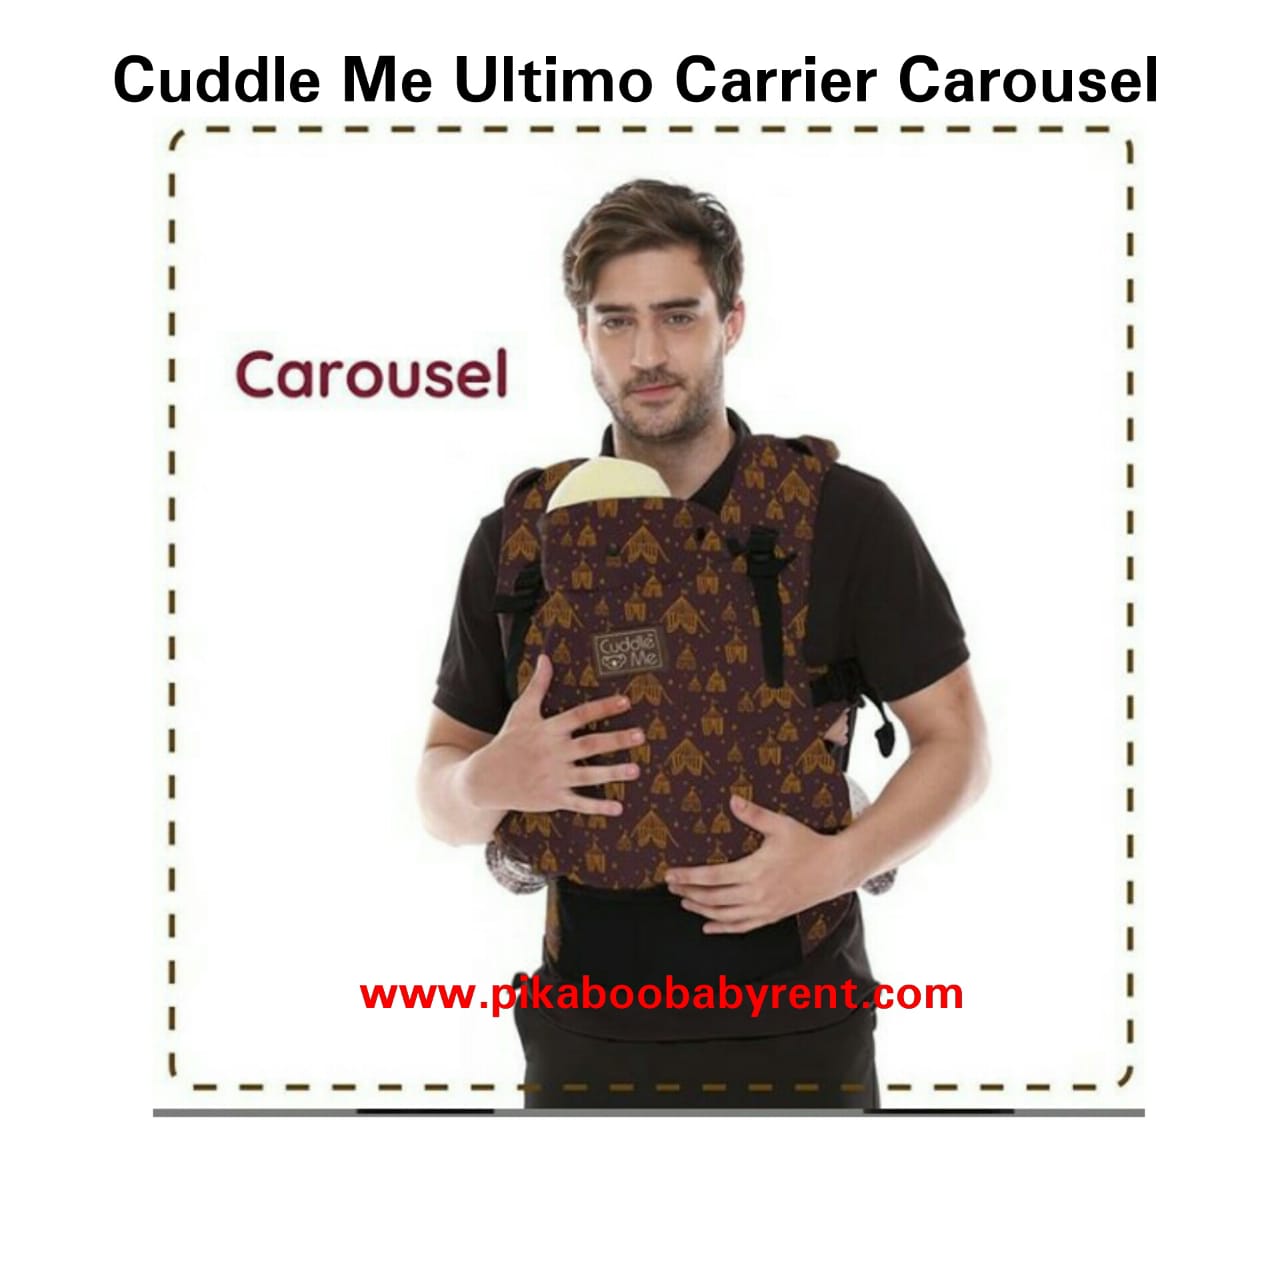 CUDDLE ME ULTIMO CARRIER CAROUSEL